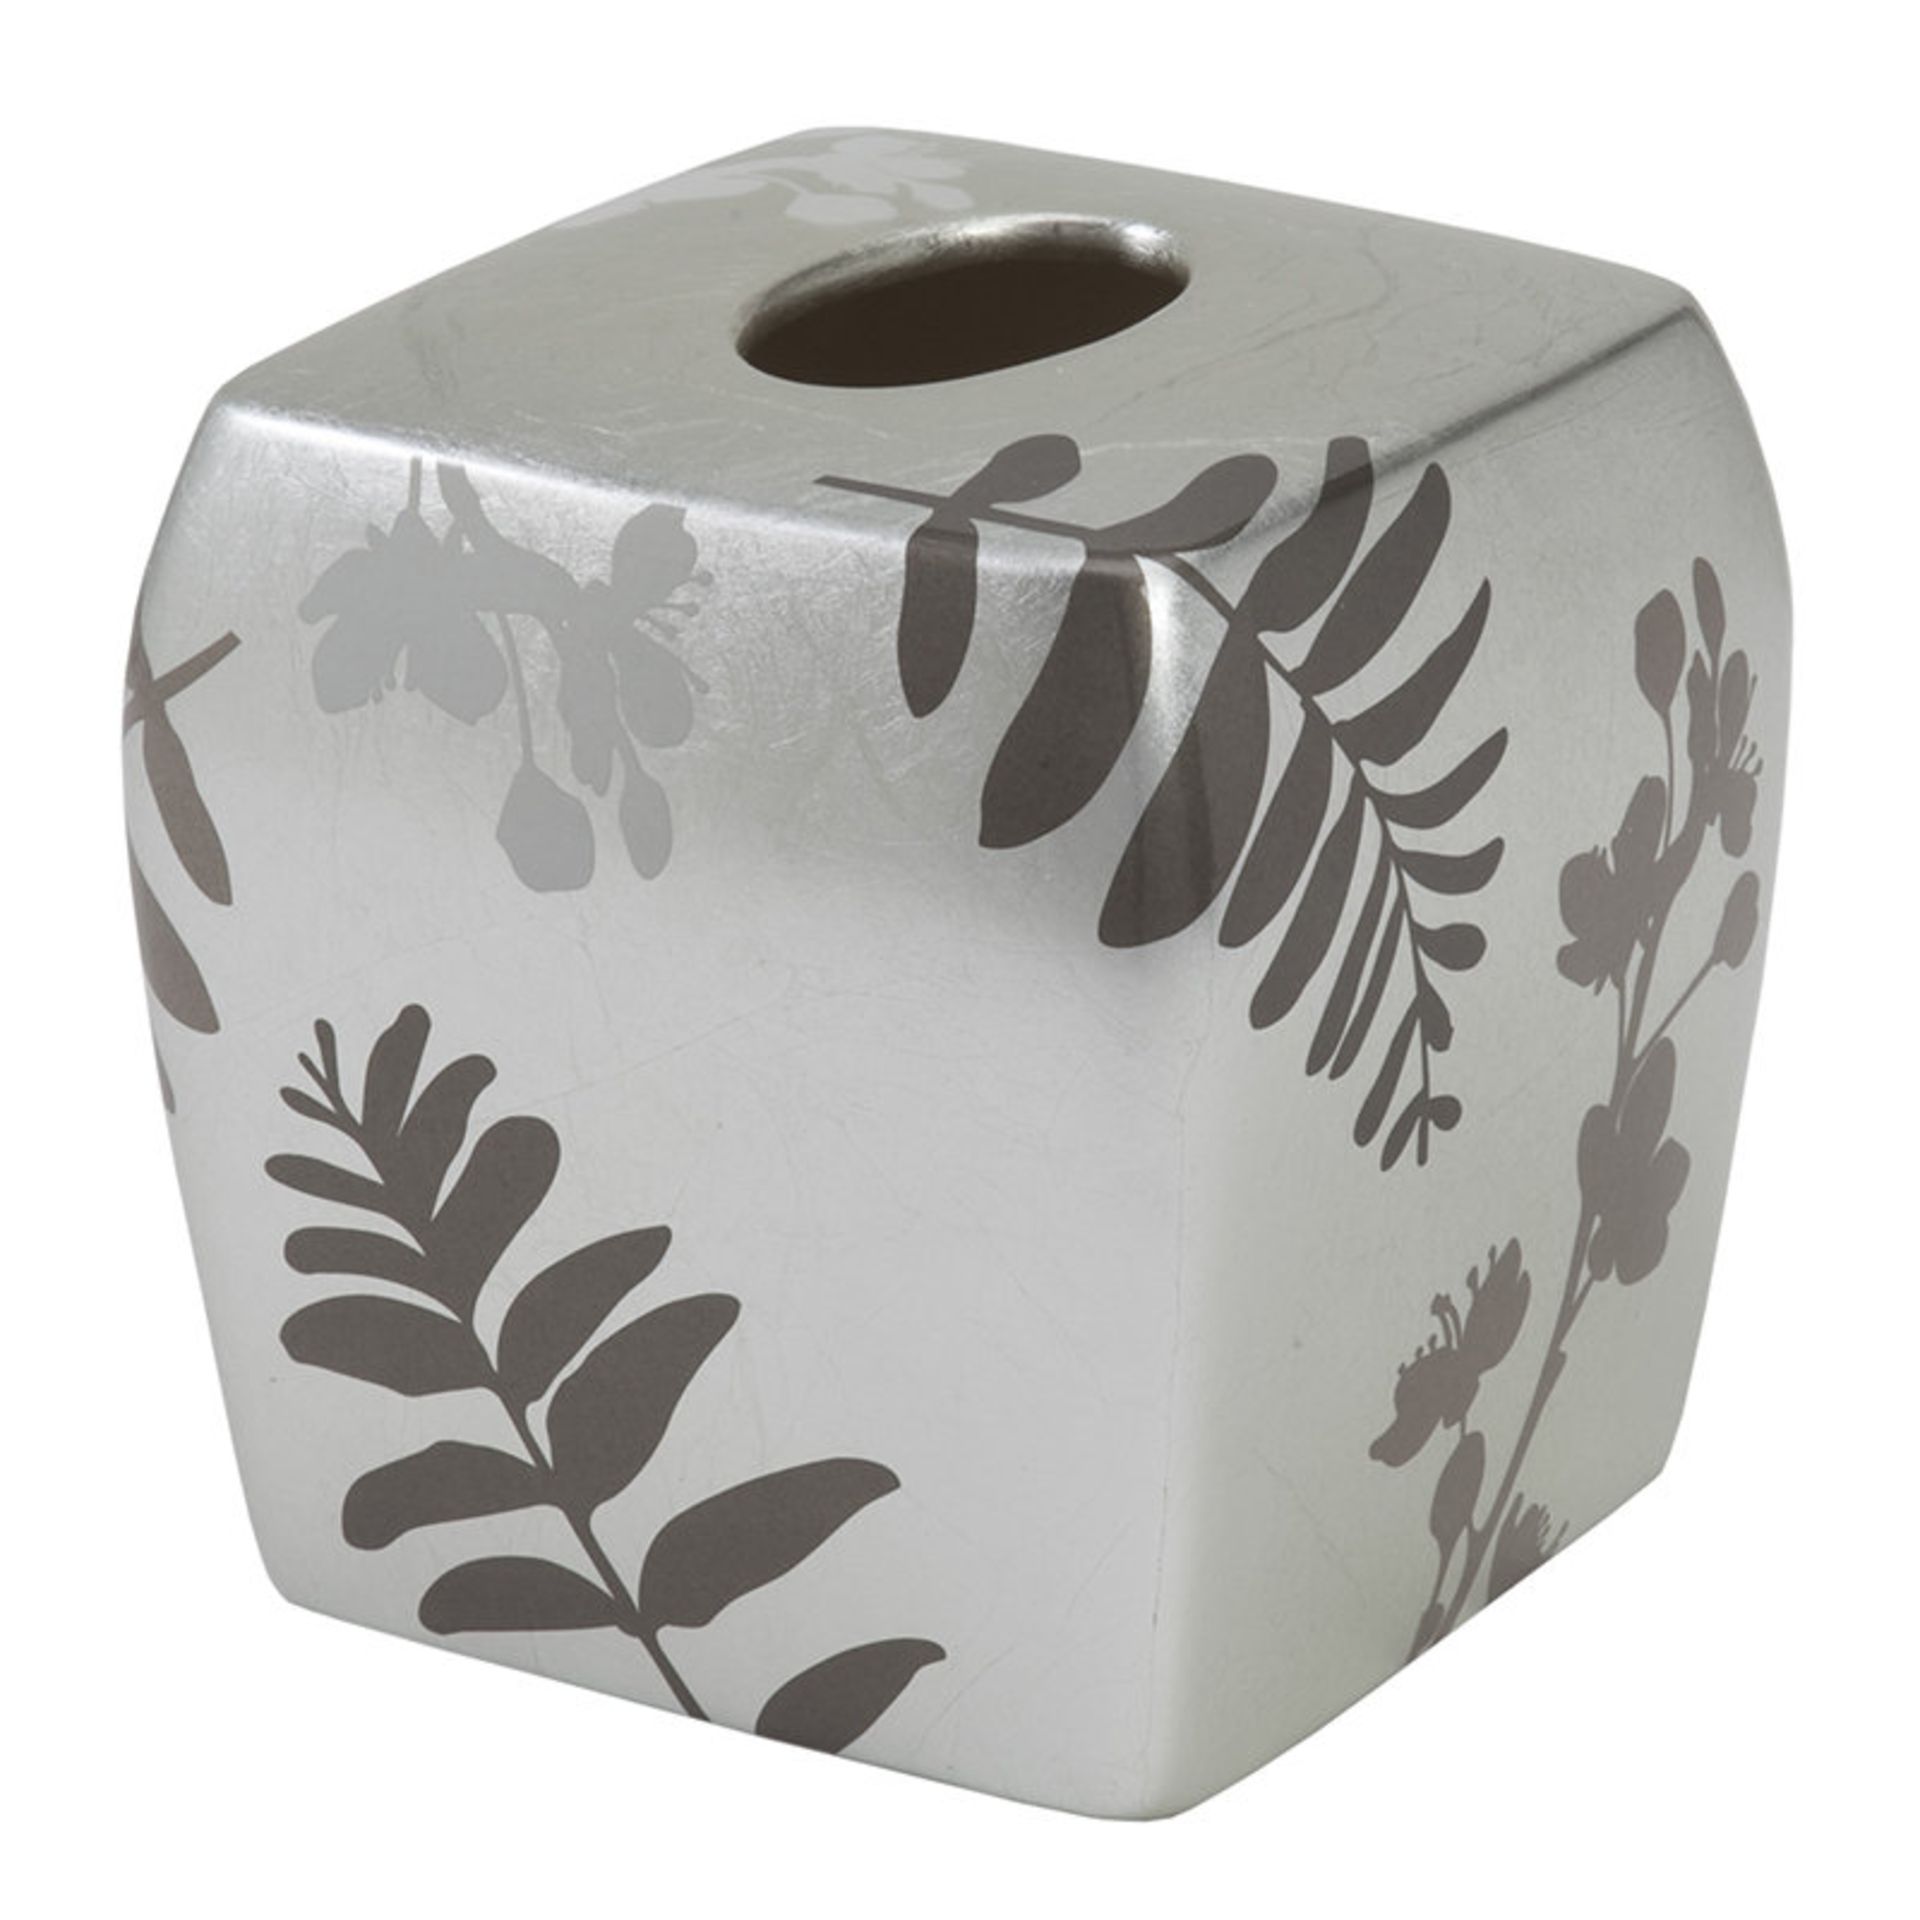 50 X TISSUE BOX COVERS , DECO HOUSE ITEM - Image 2 of 2